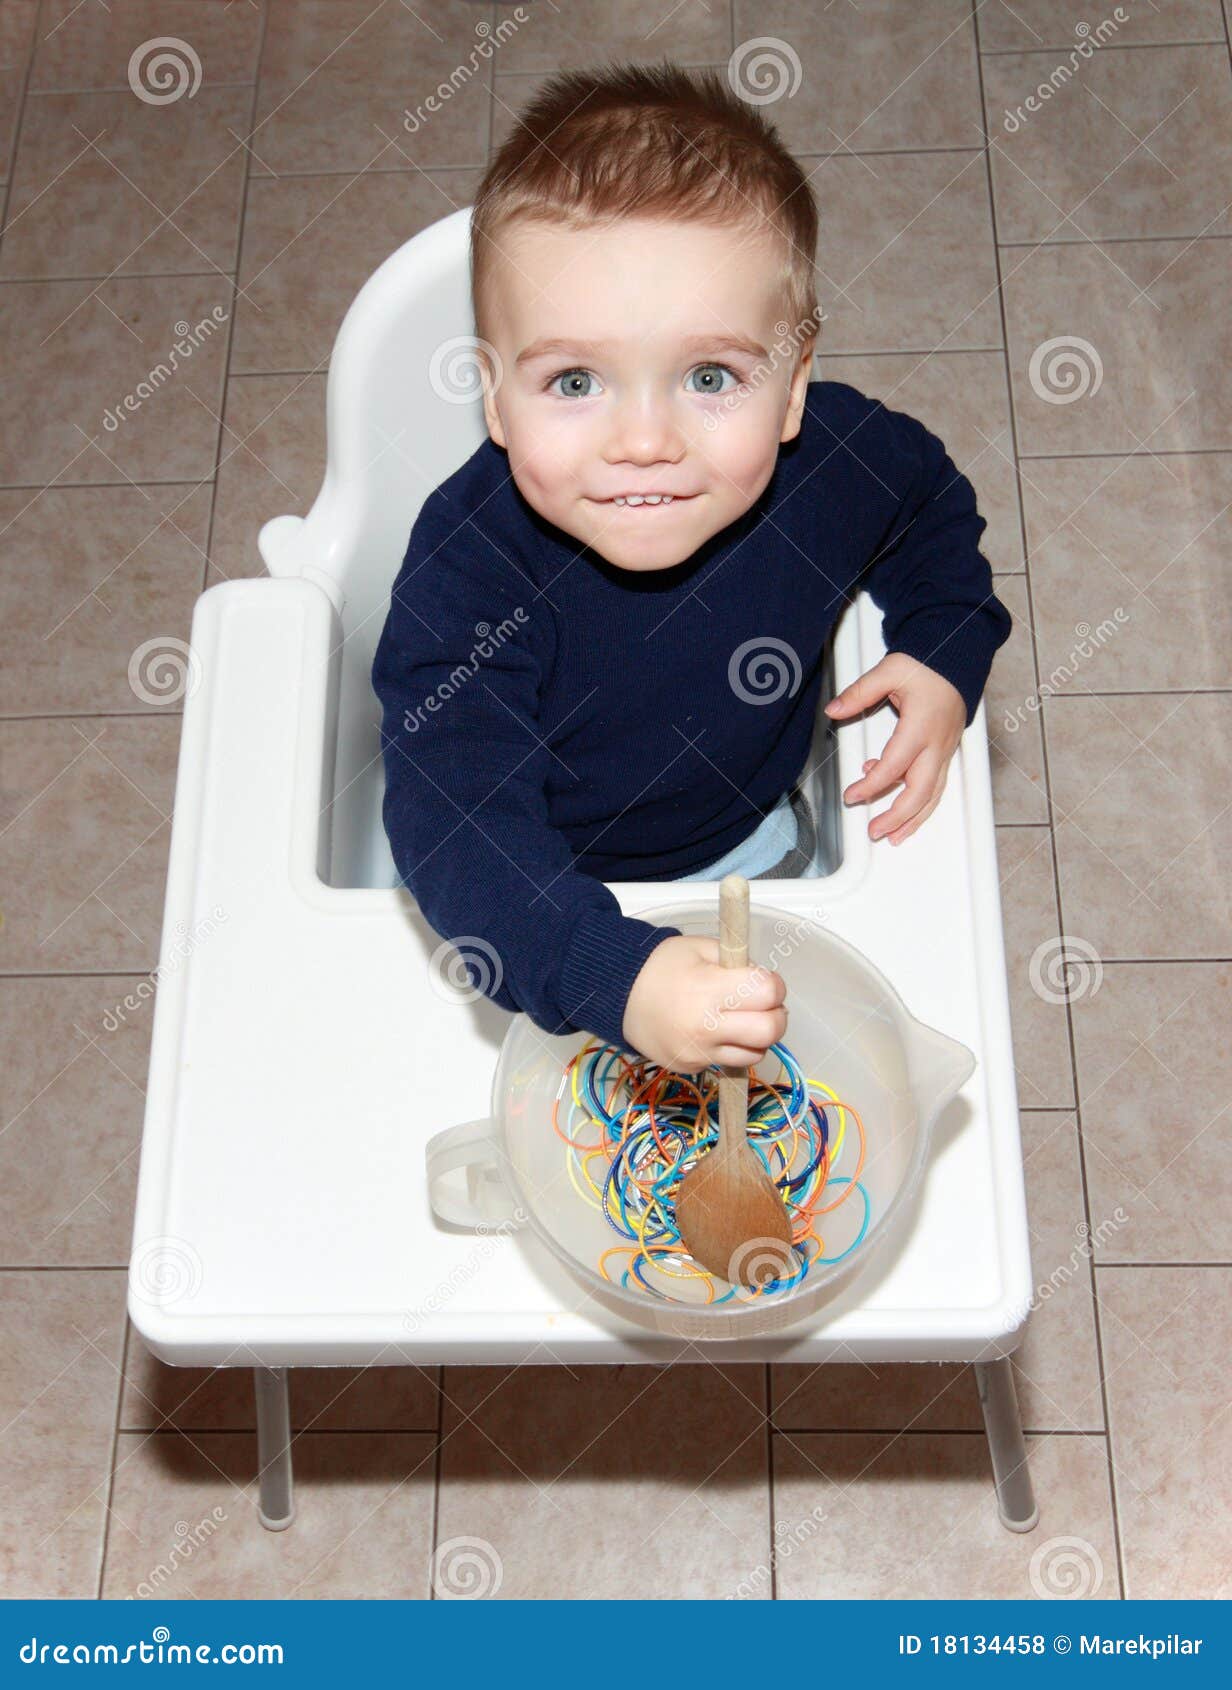 Boy cooking stock photo. Image of smiling, wood, wooden - 18134458